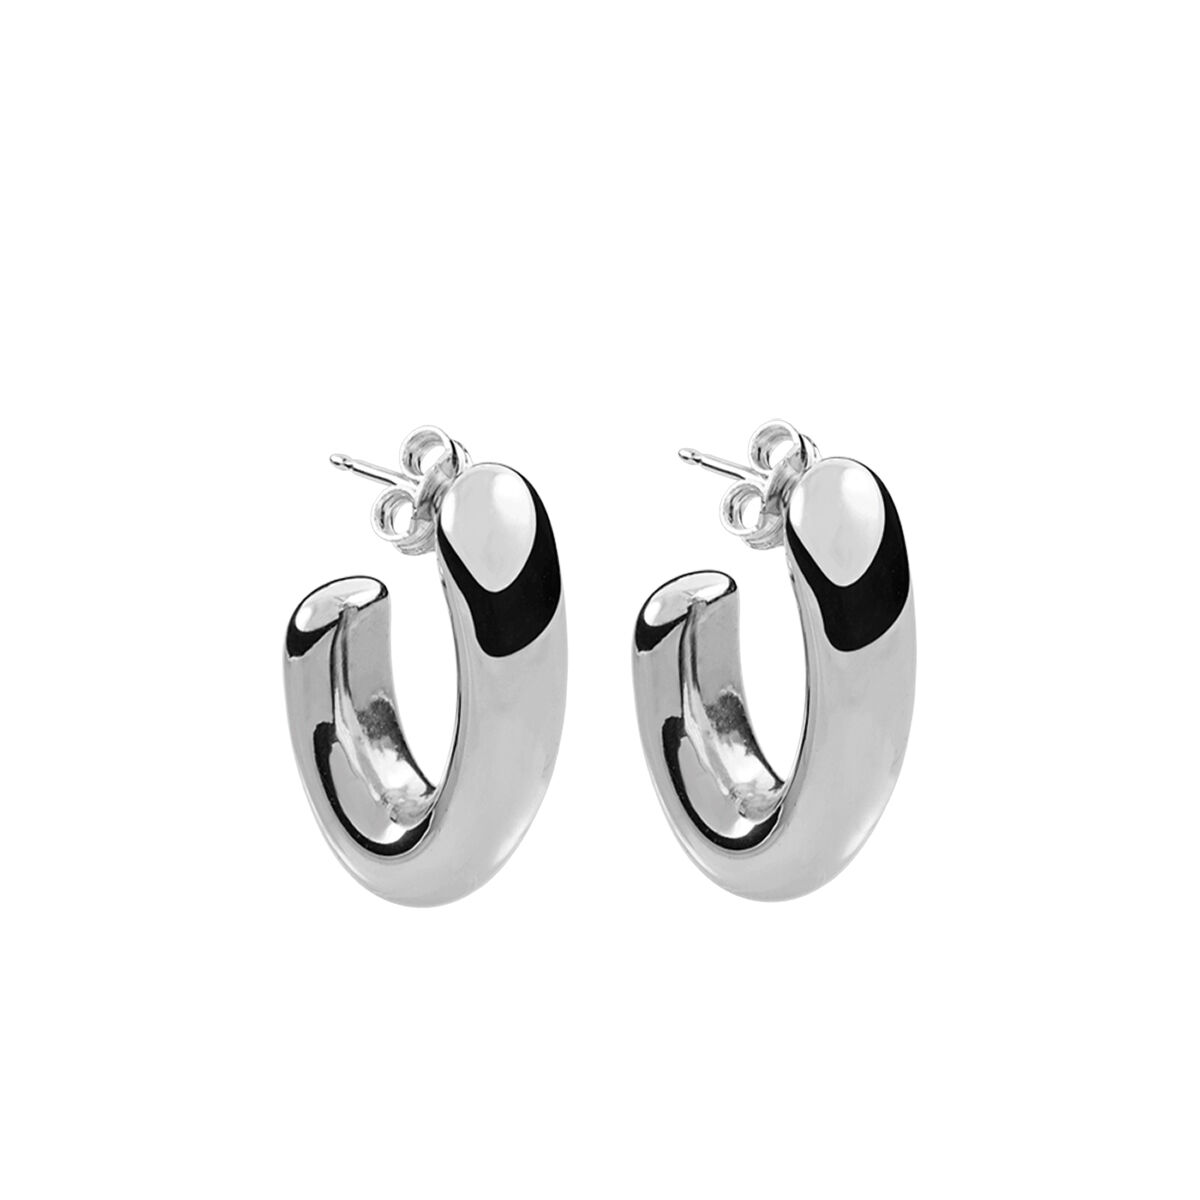 Medium silver oval thick earrings , J00799-01, hi-res